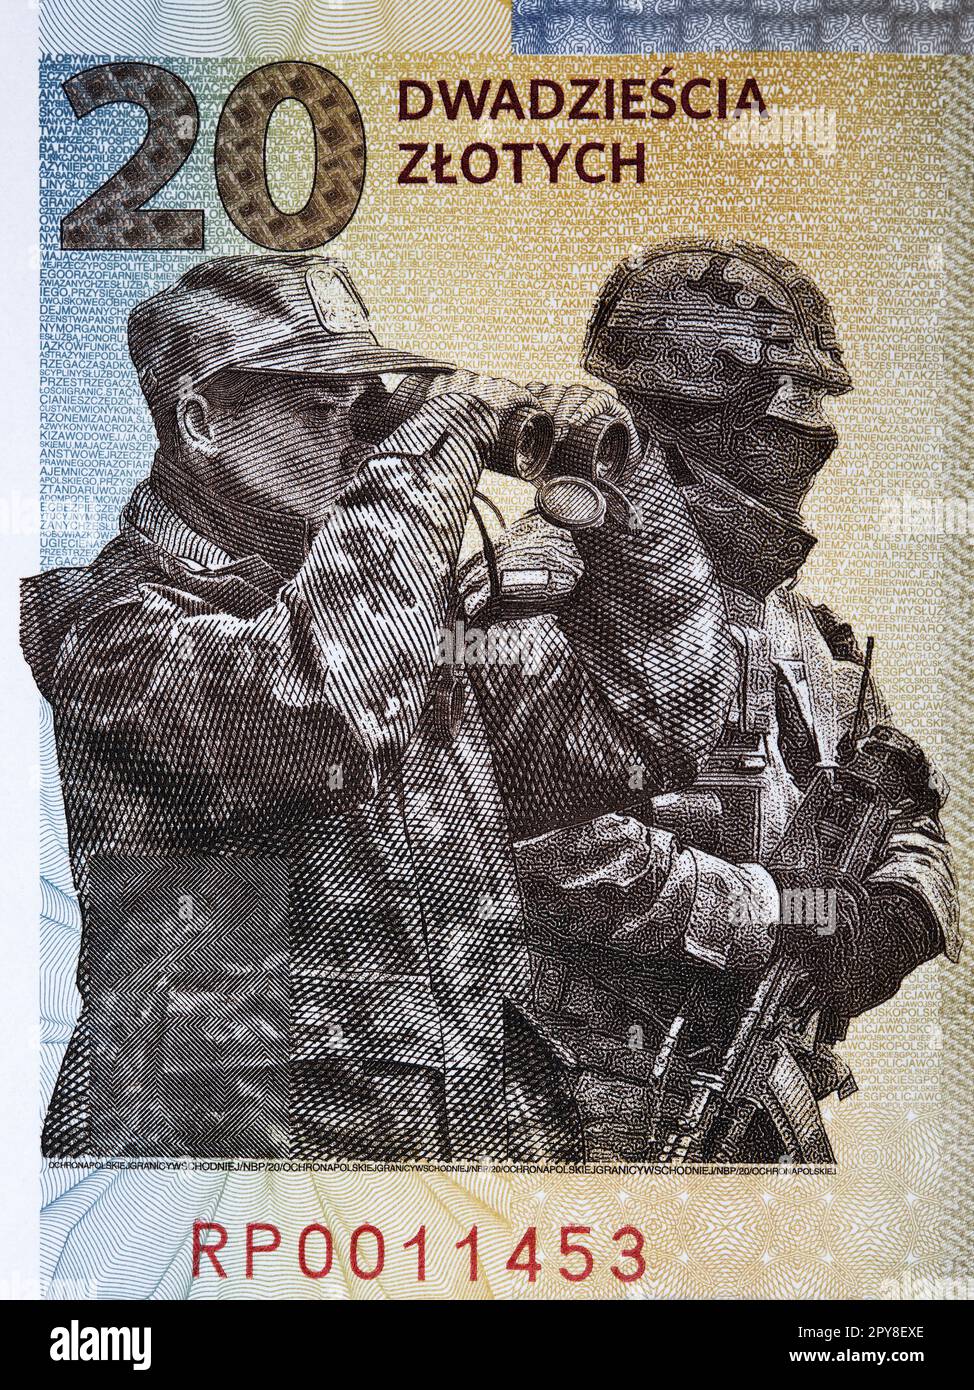 Polish soldiers a portrait from money Stock Photo